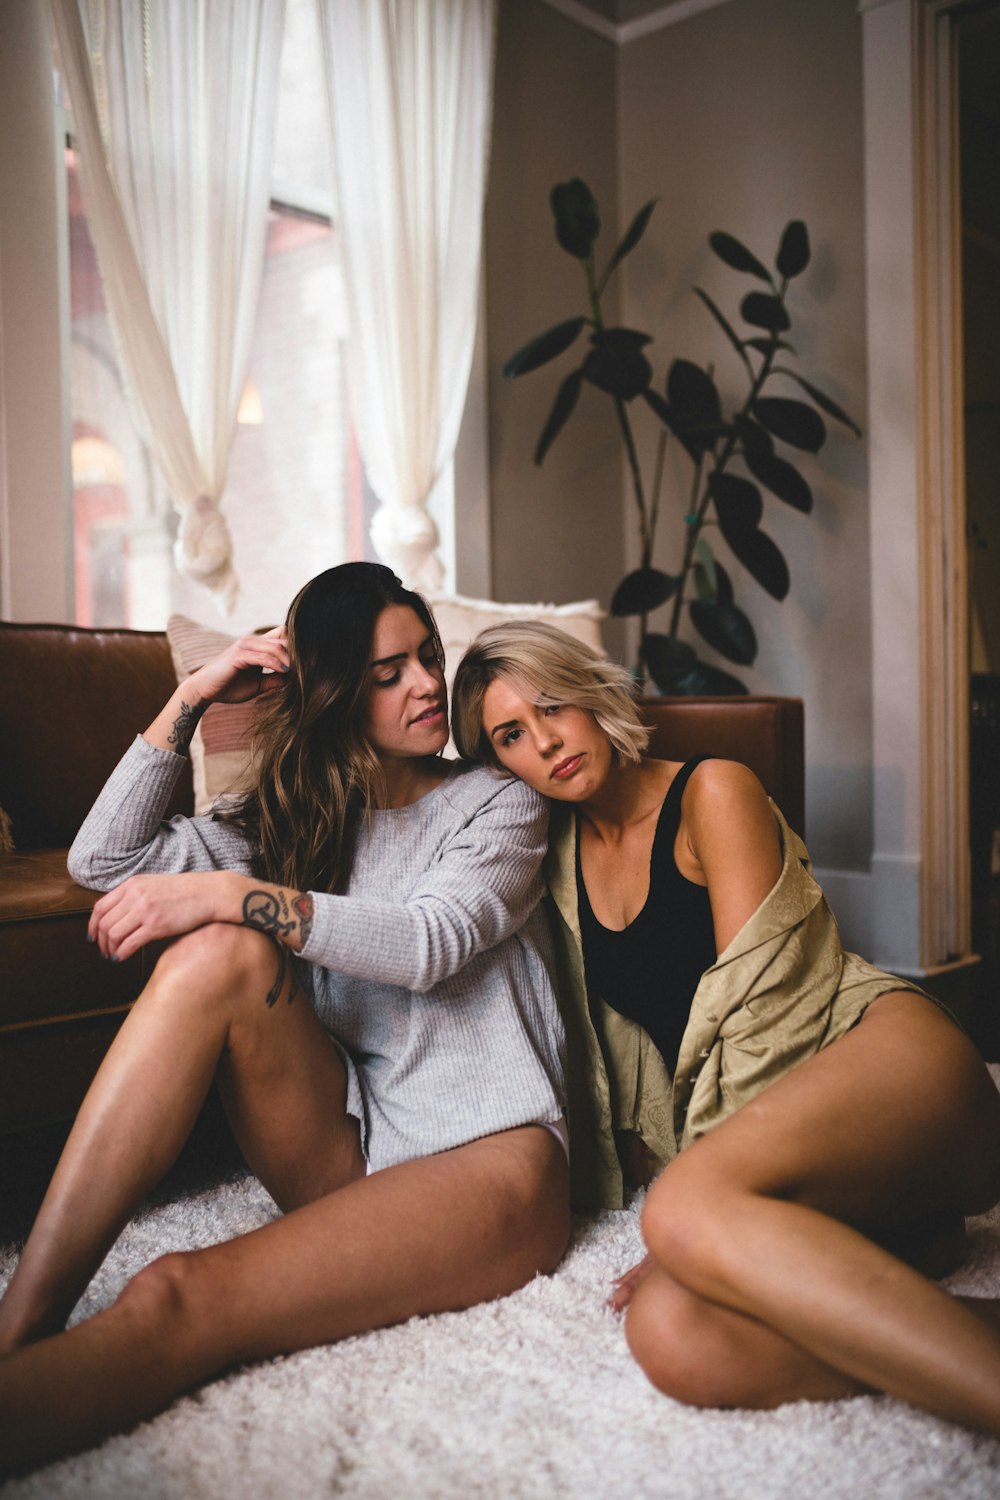 2 women sitting on couch